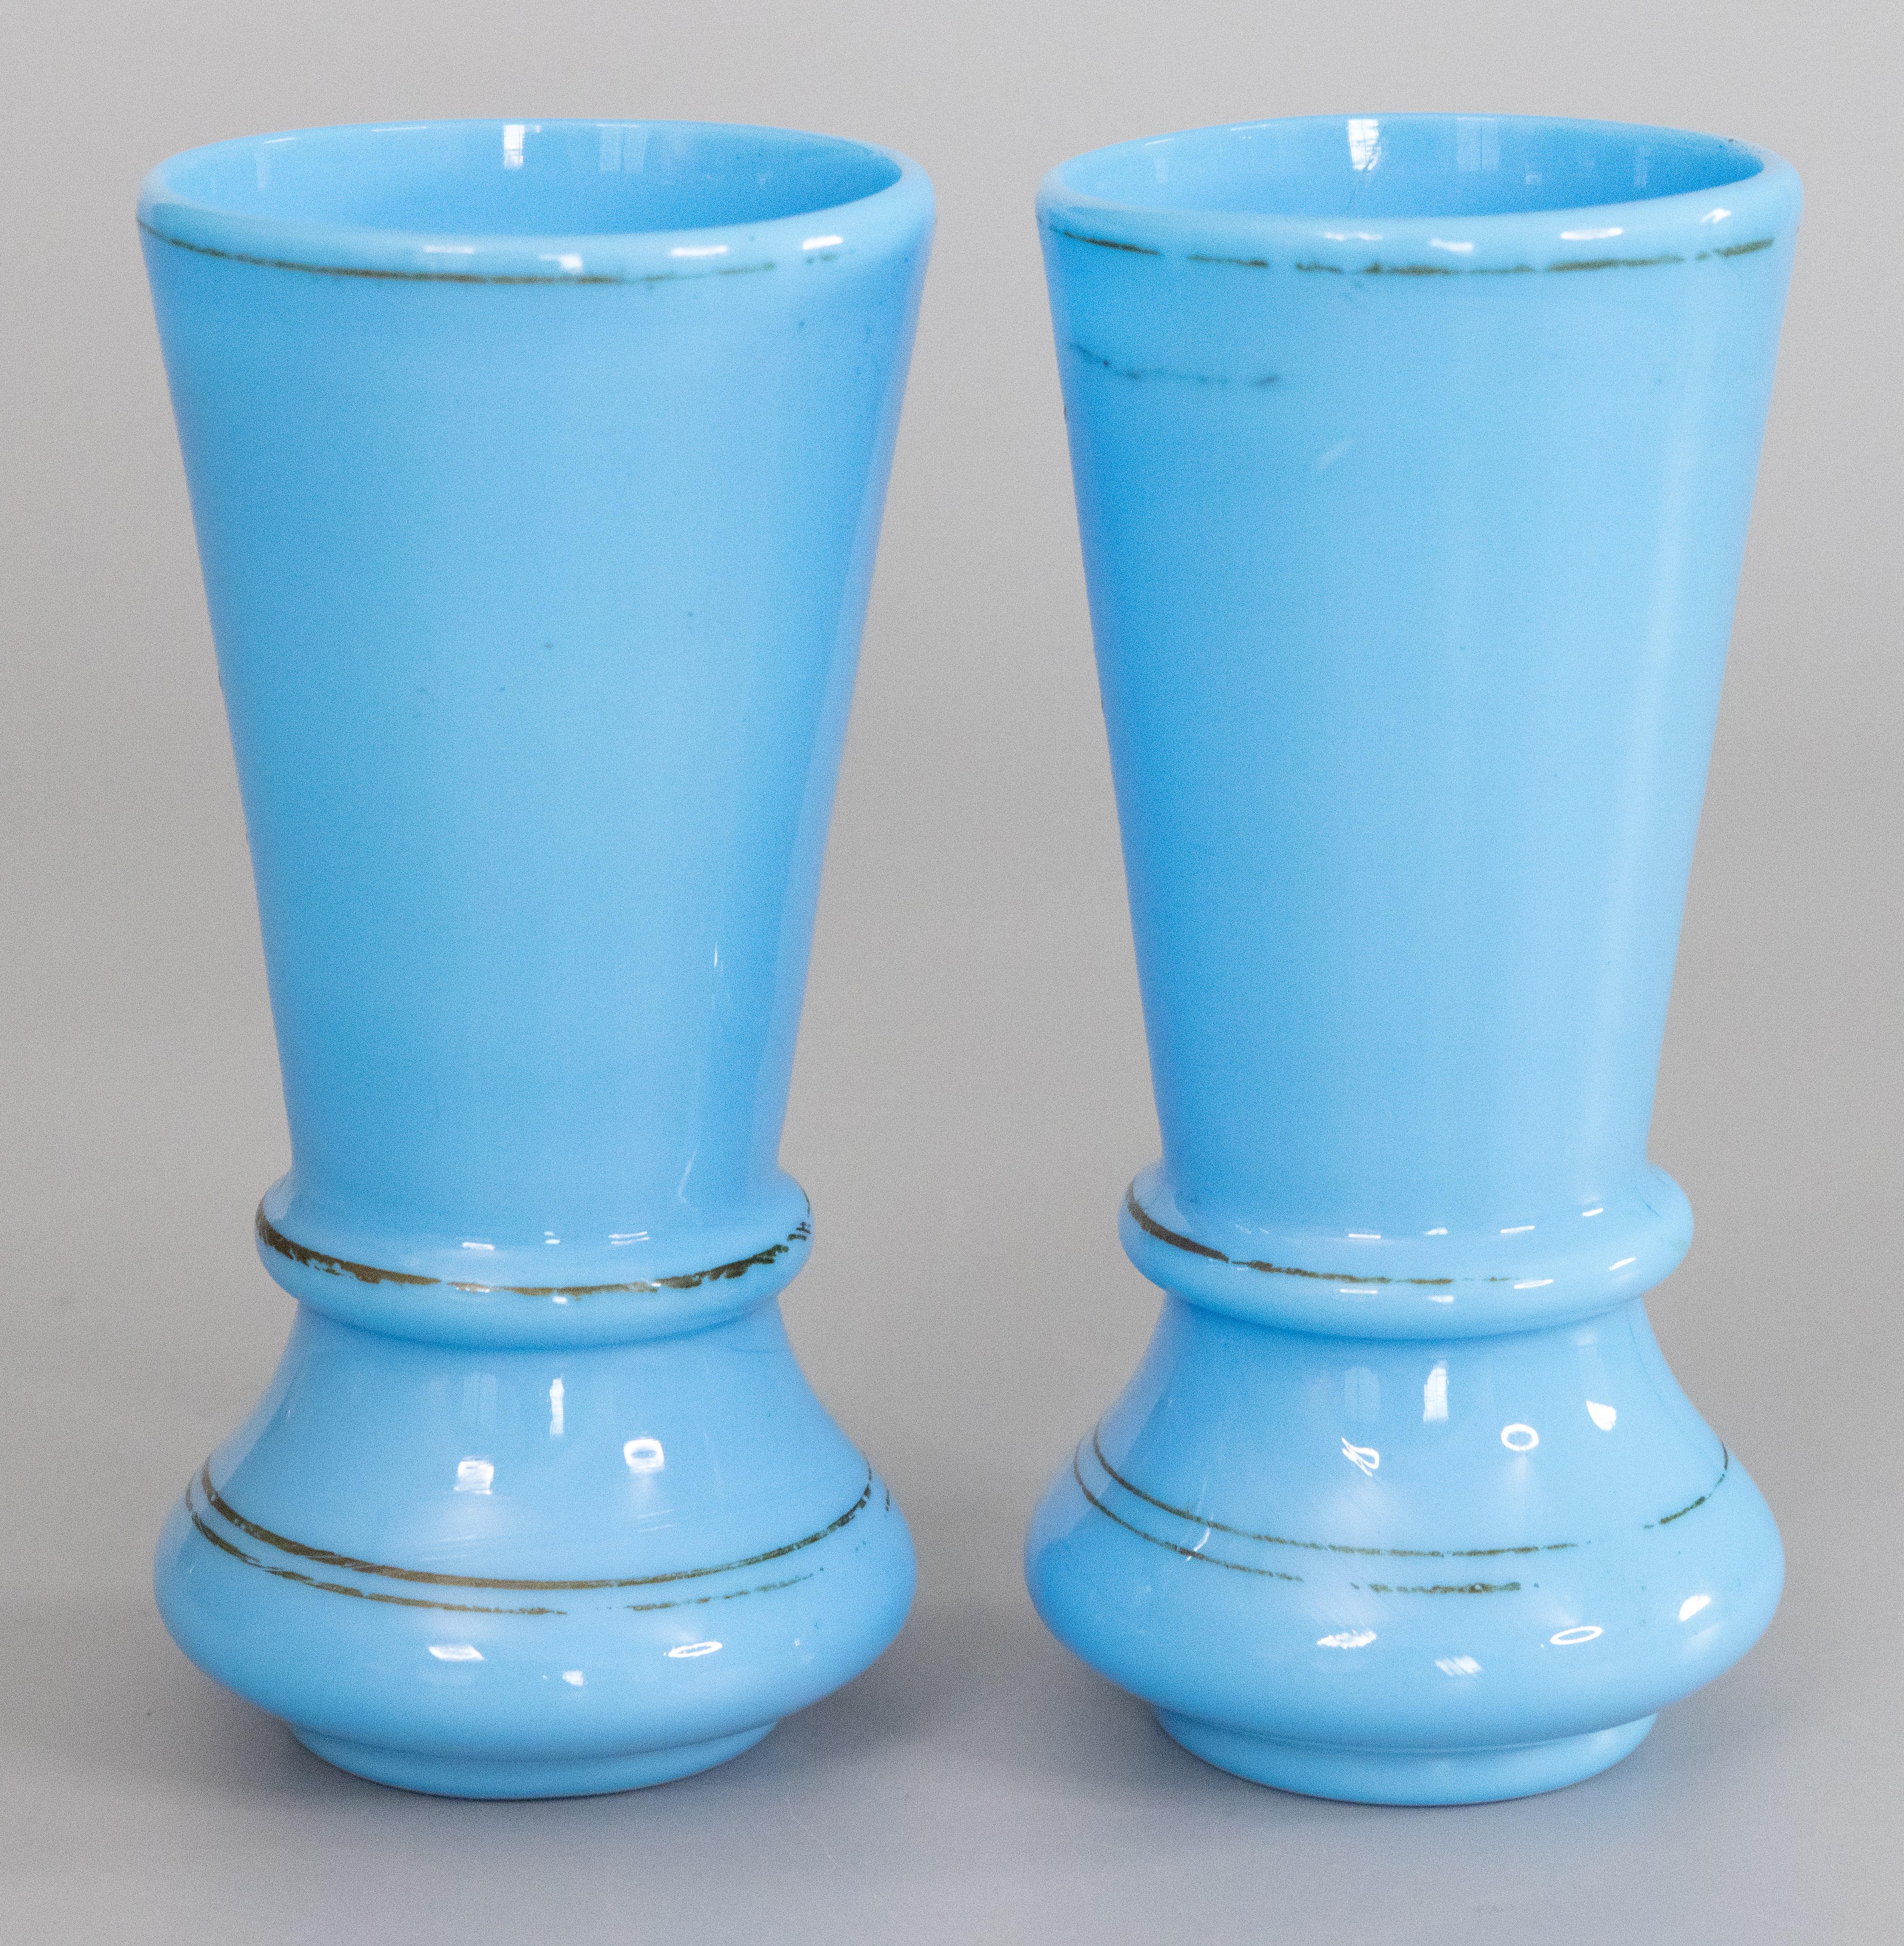 A gorgeous pair of antique French Napoleon III blue opaline glass vases with hand painted gilt decoration. They are a stunning color and stylish shape, perfect for the modern home.